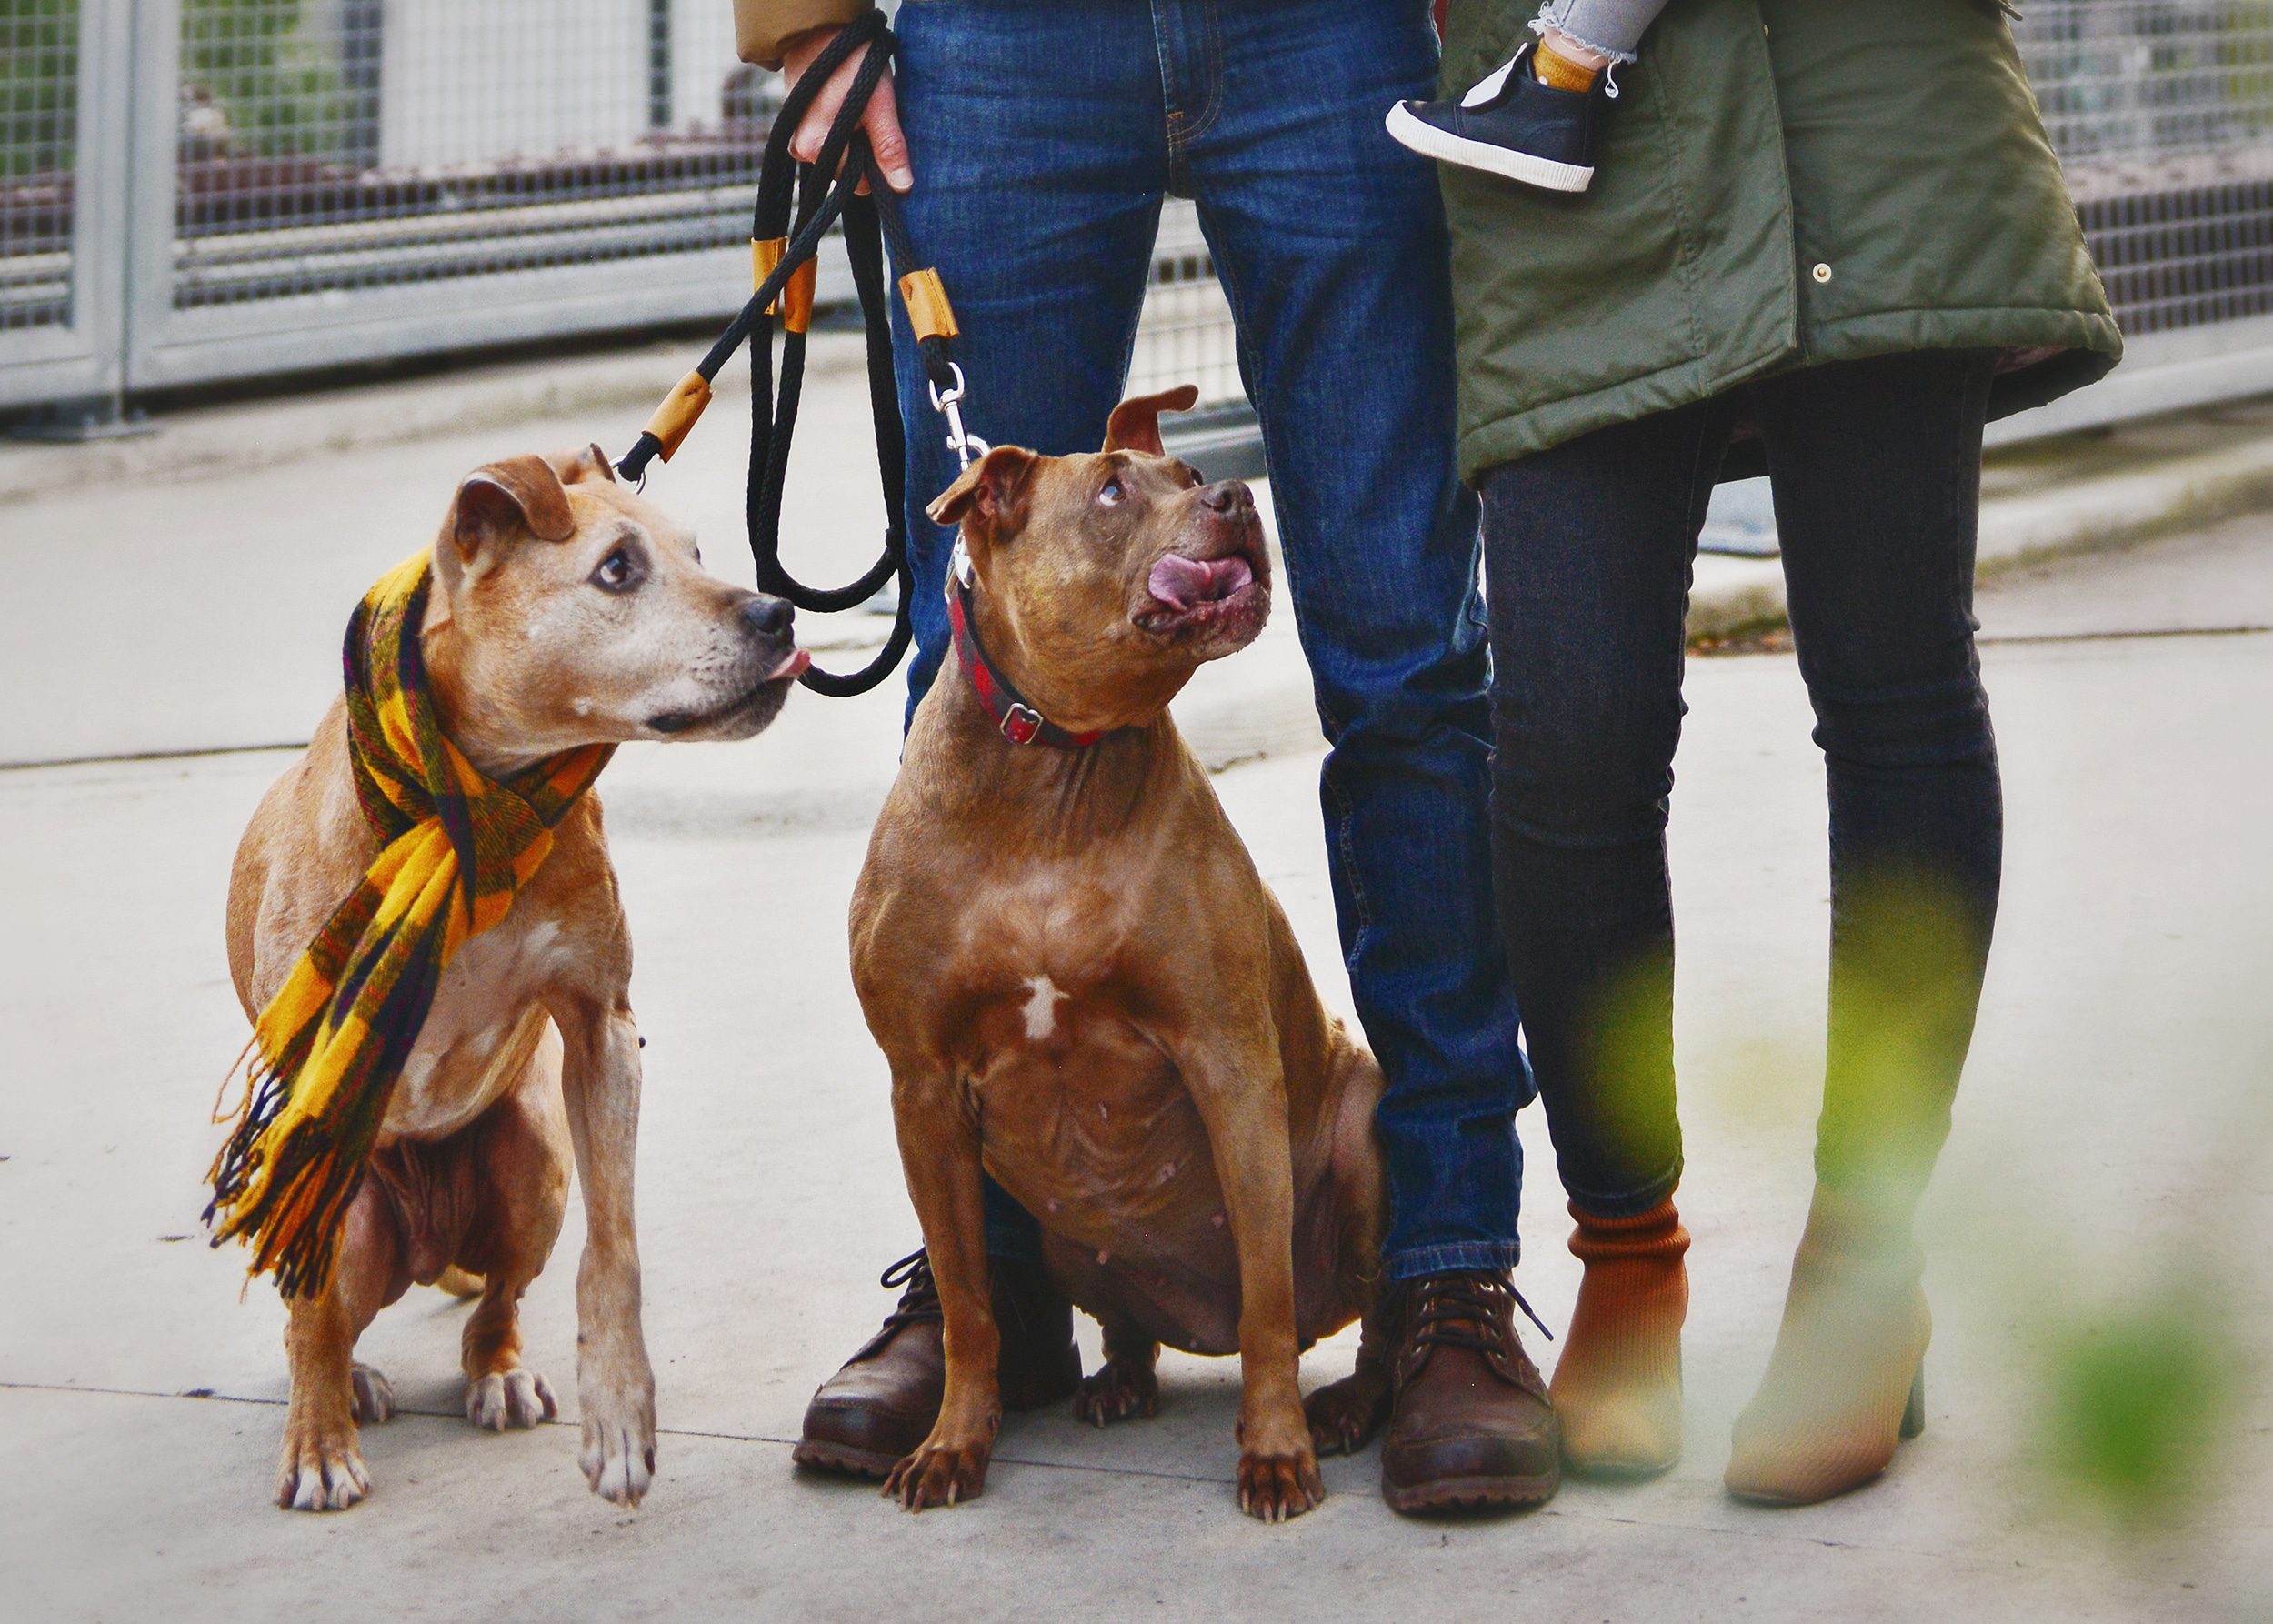 2 Pit Bulls next to the legs of their owners, with one wearing a holiday scarf | via Yellow Brick Home